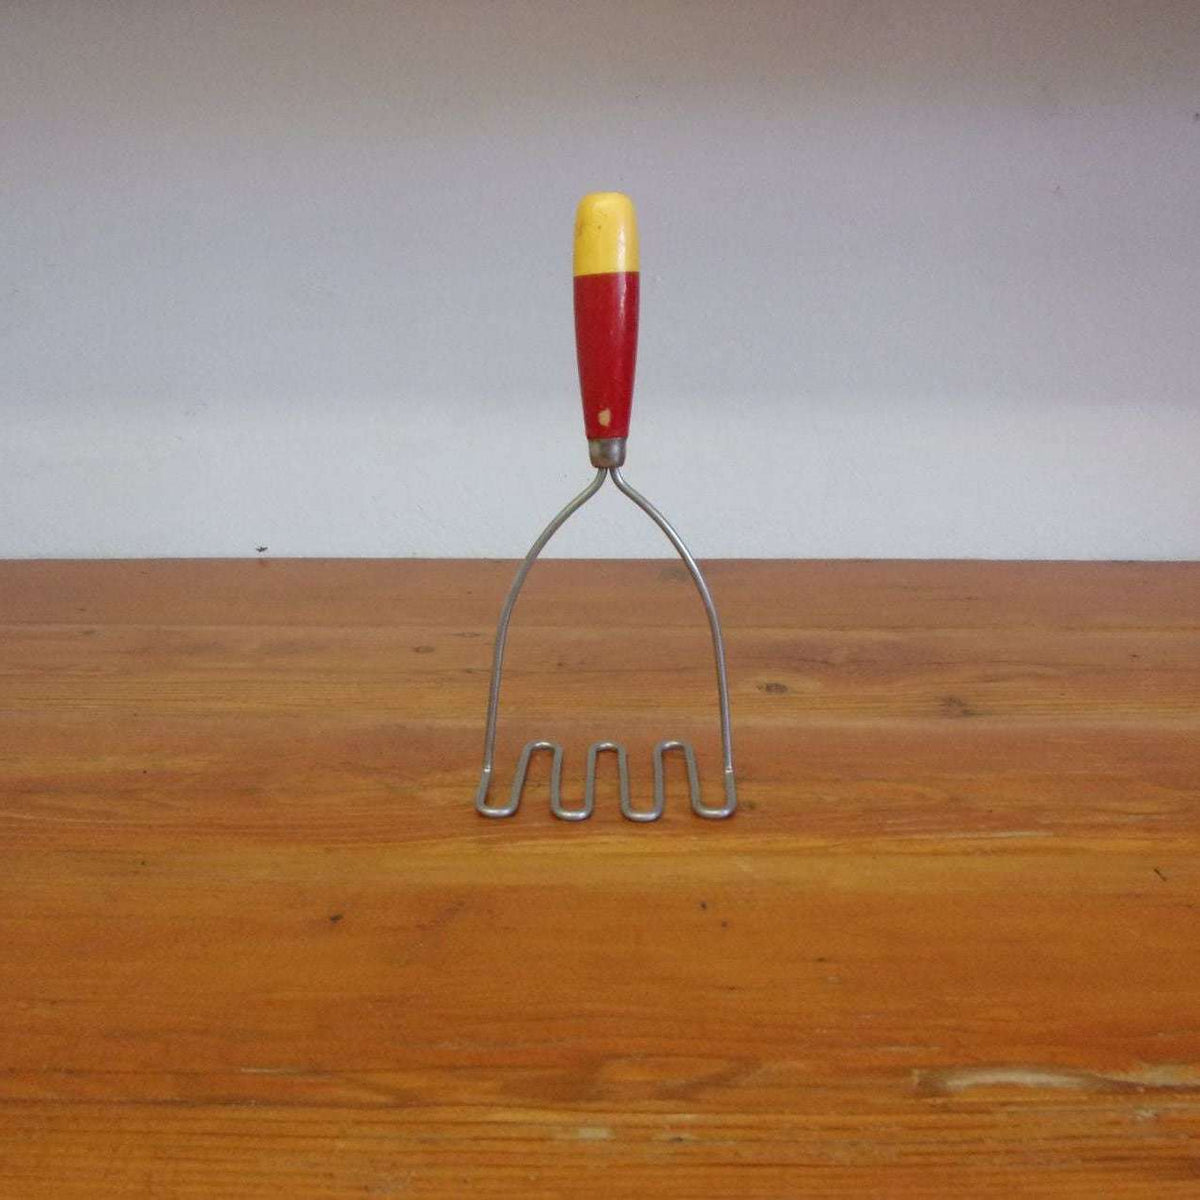 Vintage Potato Masher With Wooden Handle Chipped Paint, Midcentury